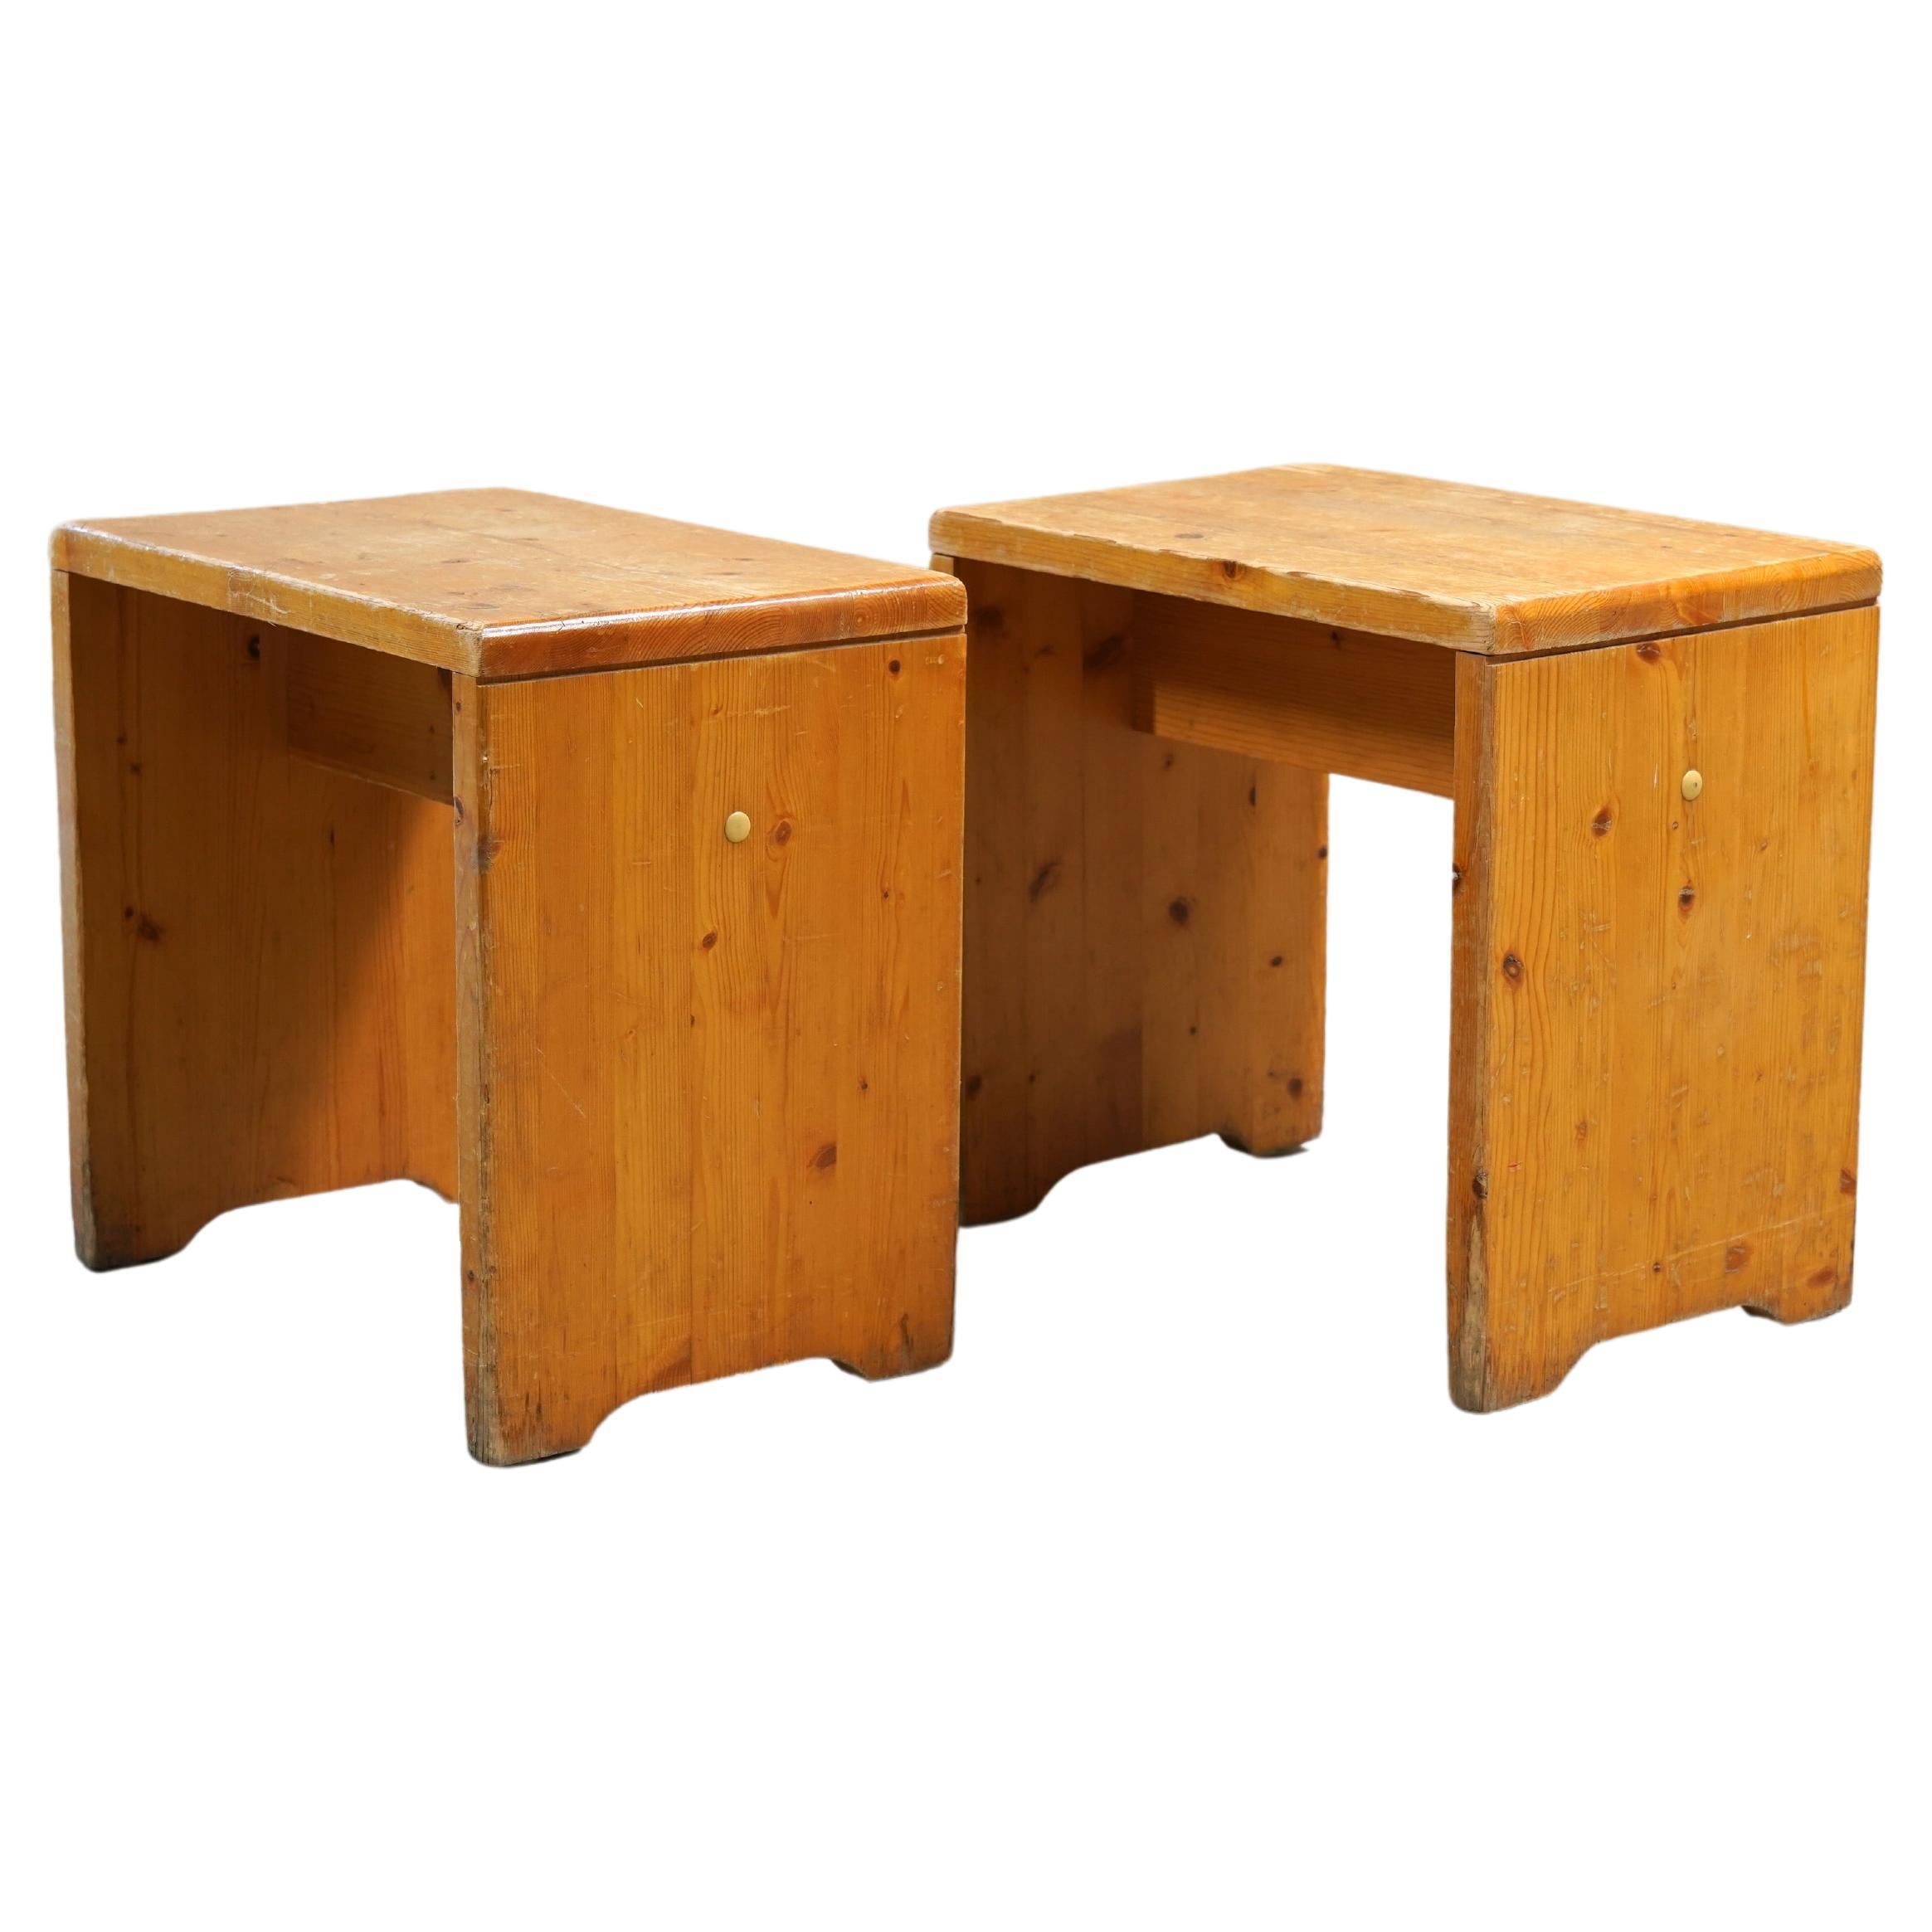 Charlotte Perriand Stools from Les Arcs, France circa 1968 (4 Available) For Sale